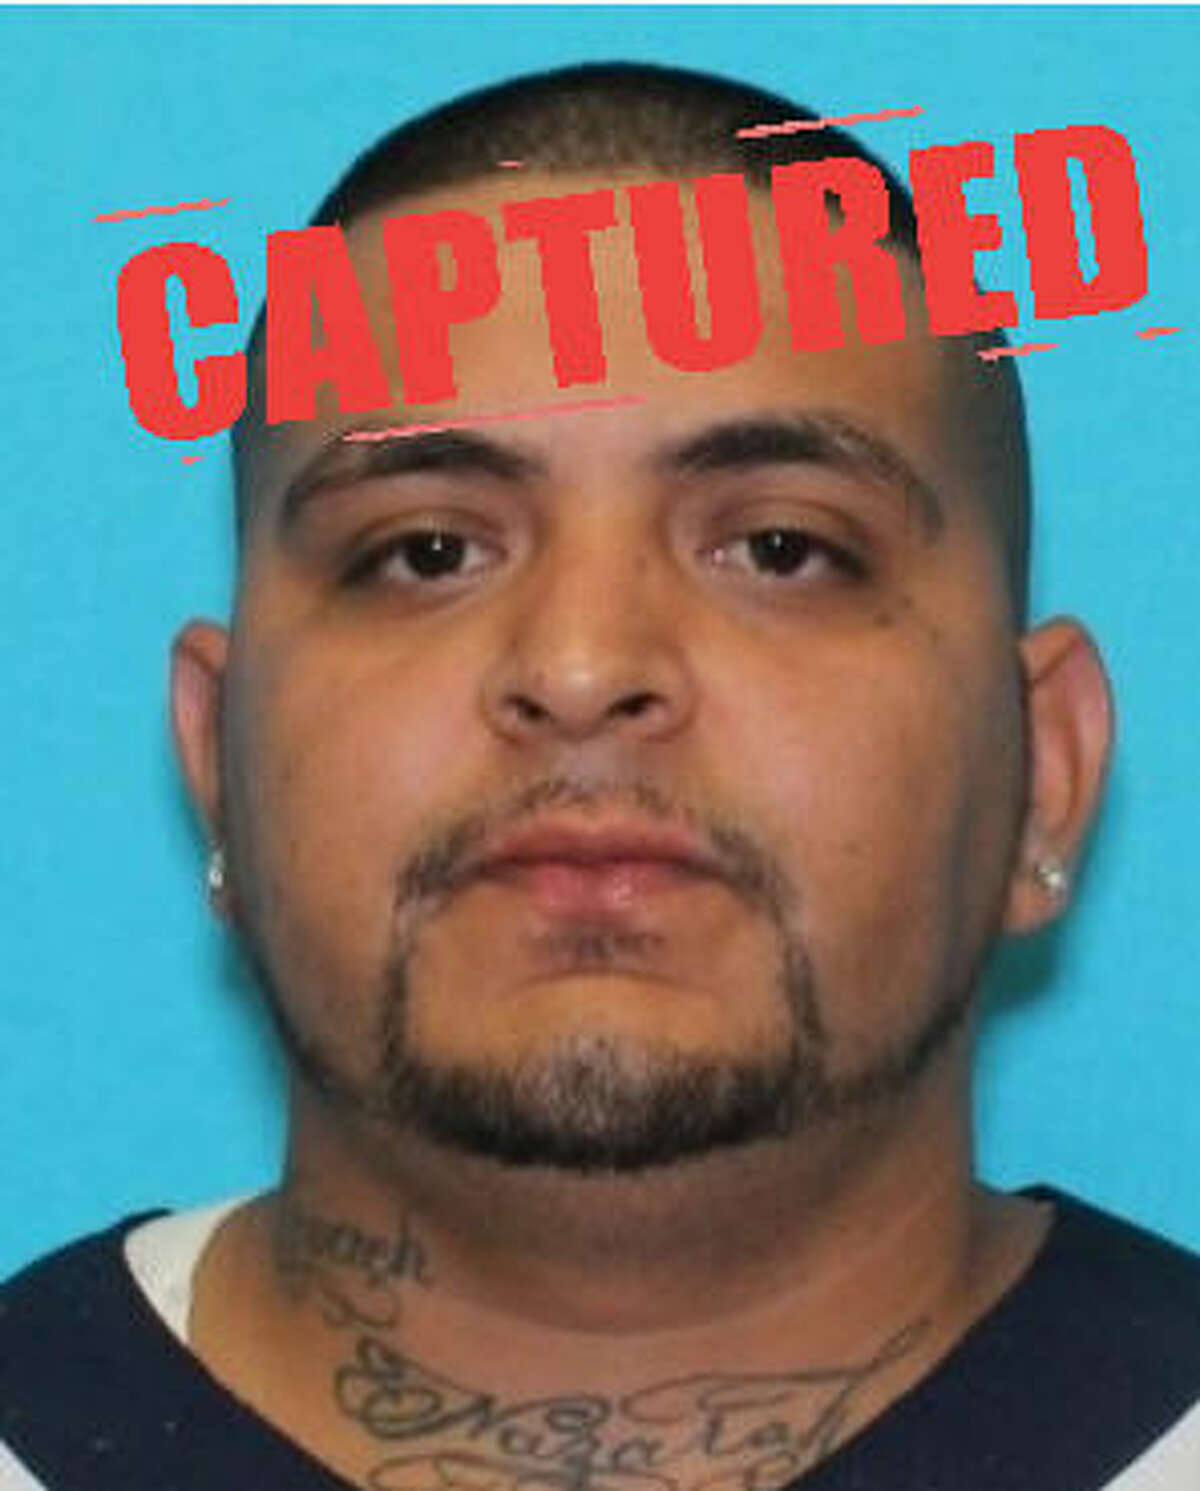 Christopher Barbontin Soloya, Jr.: 06/27/86, 5'6", 195 lbs, was arrested in Houston Thursday, July 21, 2016. See the photo gallery of Texas Most Wanted